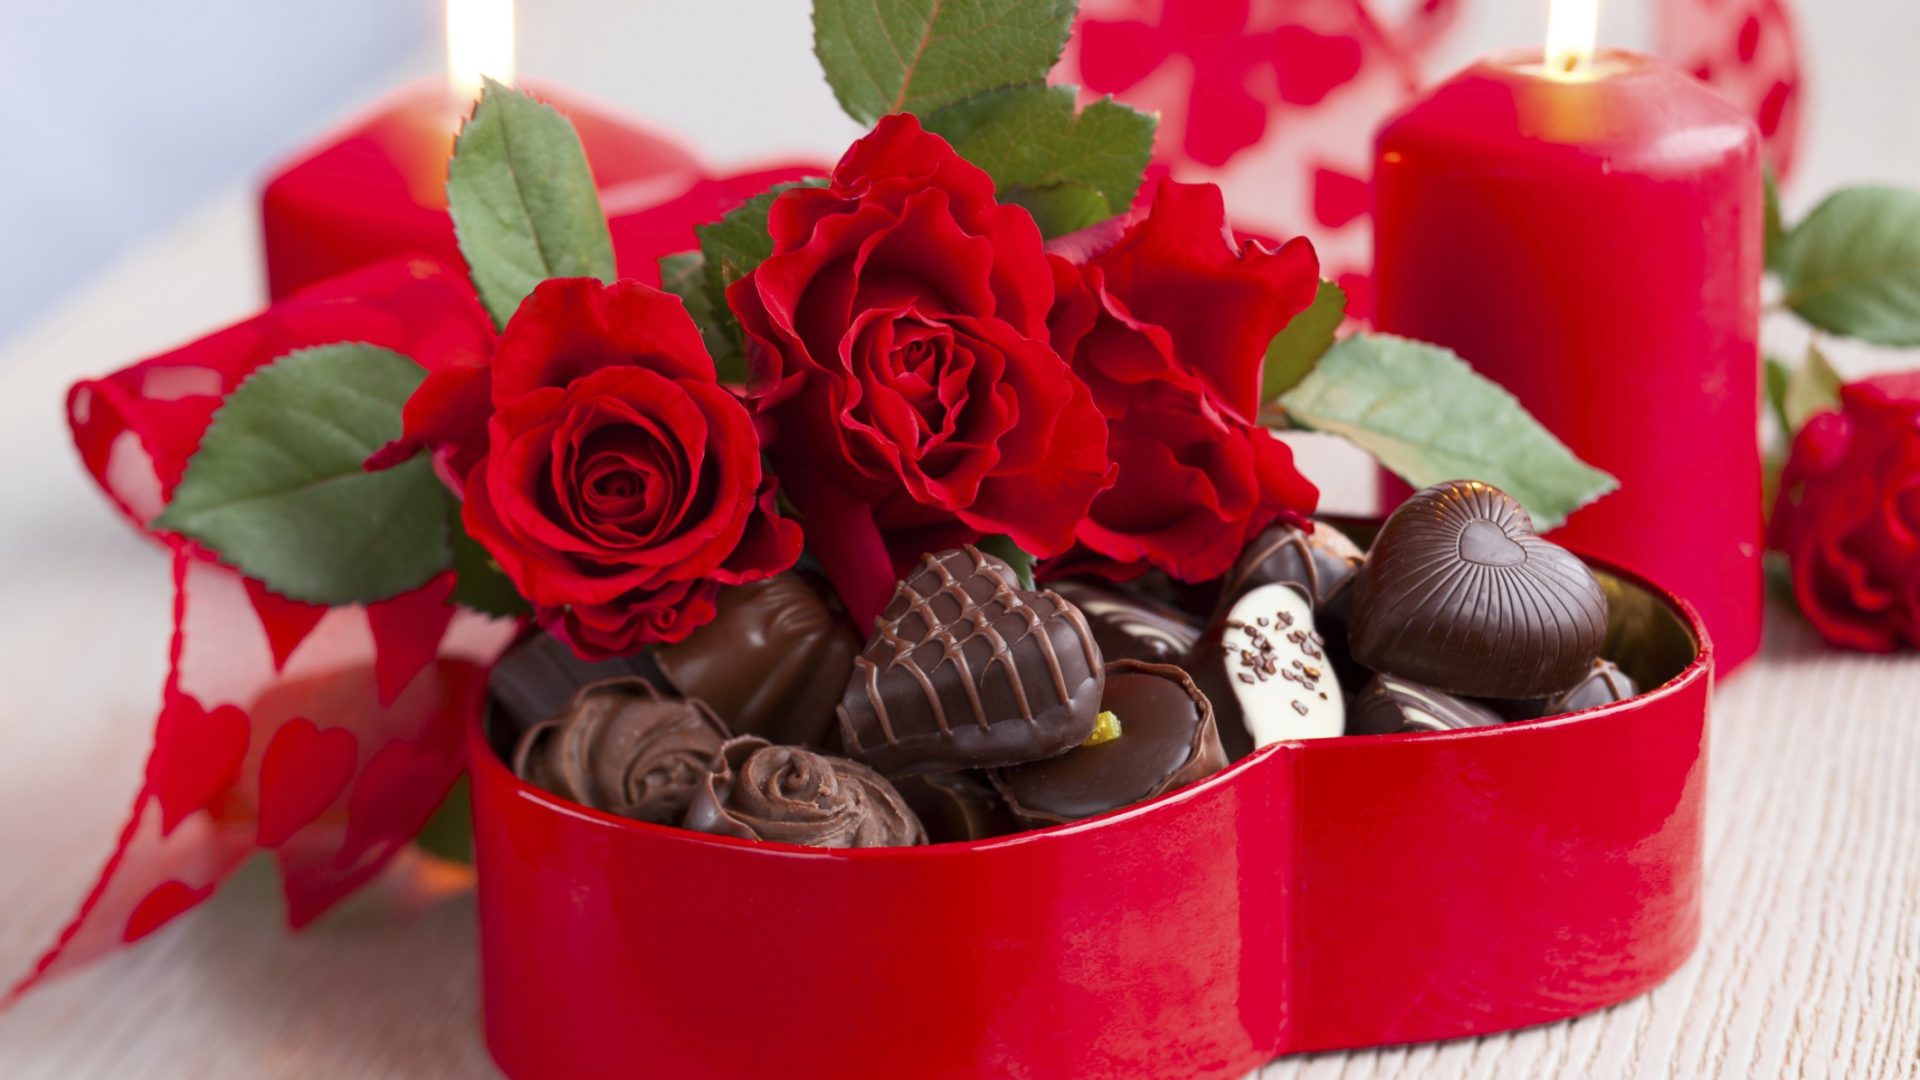 Flowers Bouquet Nature Candles Red Chocolate Roses - Flower With Chocholate Gift Bouquet - HD Wallpaper 